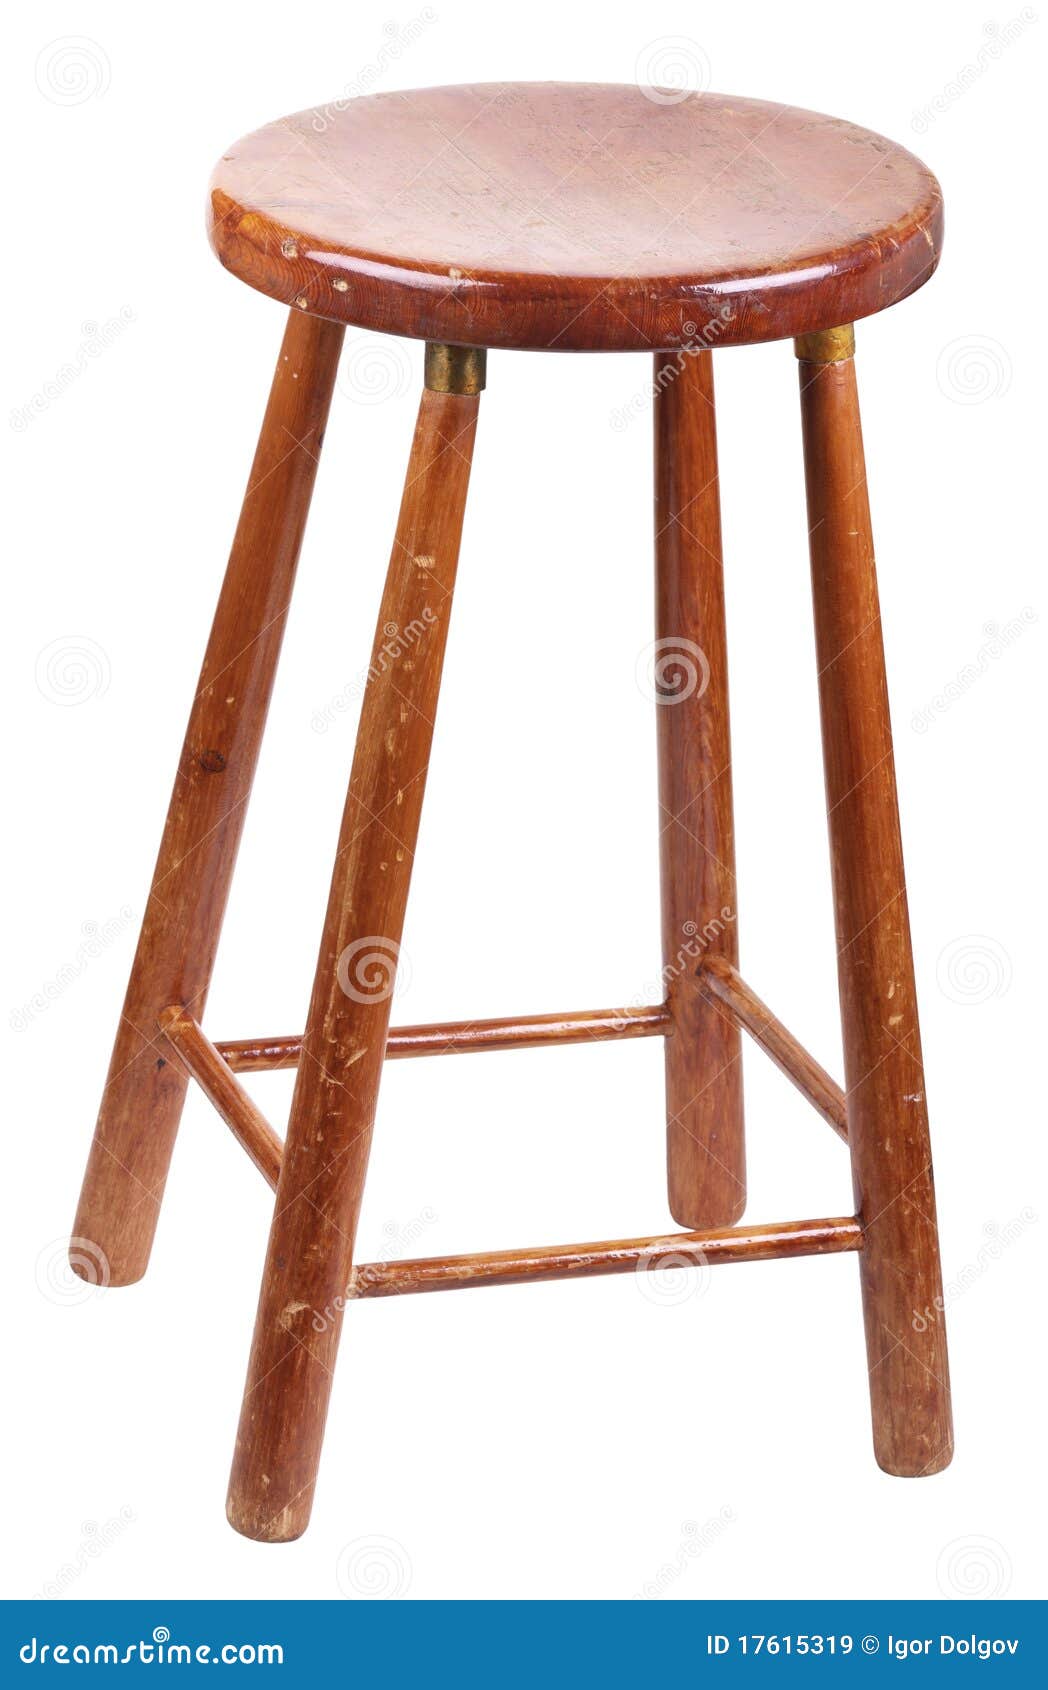 Old Stool Royalty Free Stock Images - Image: 17615319